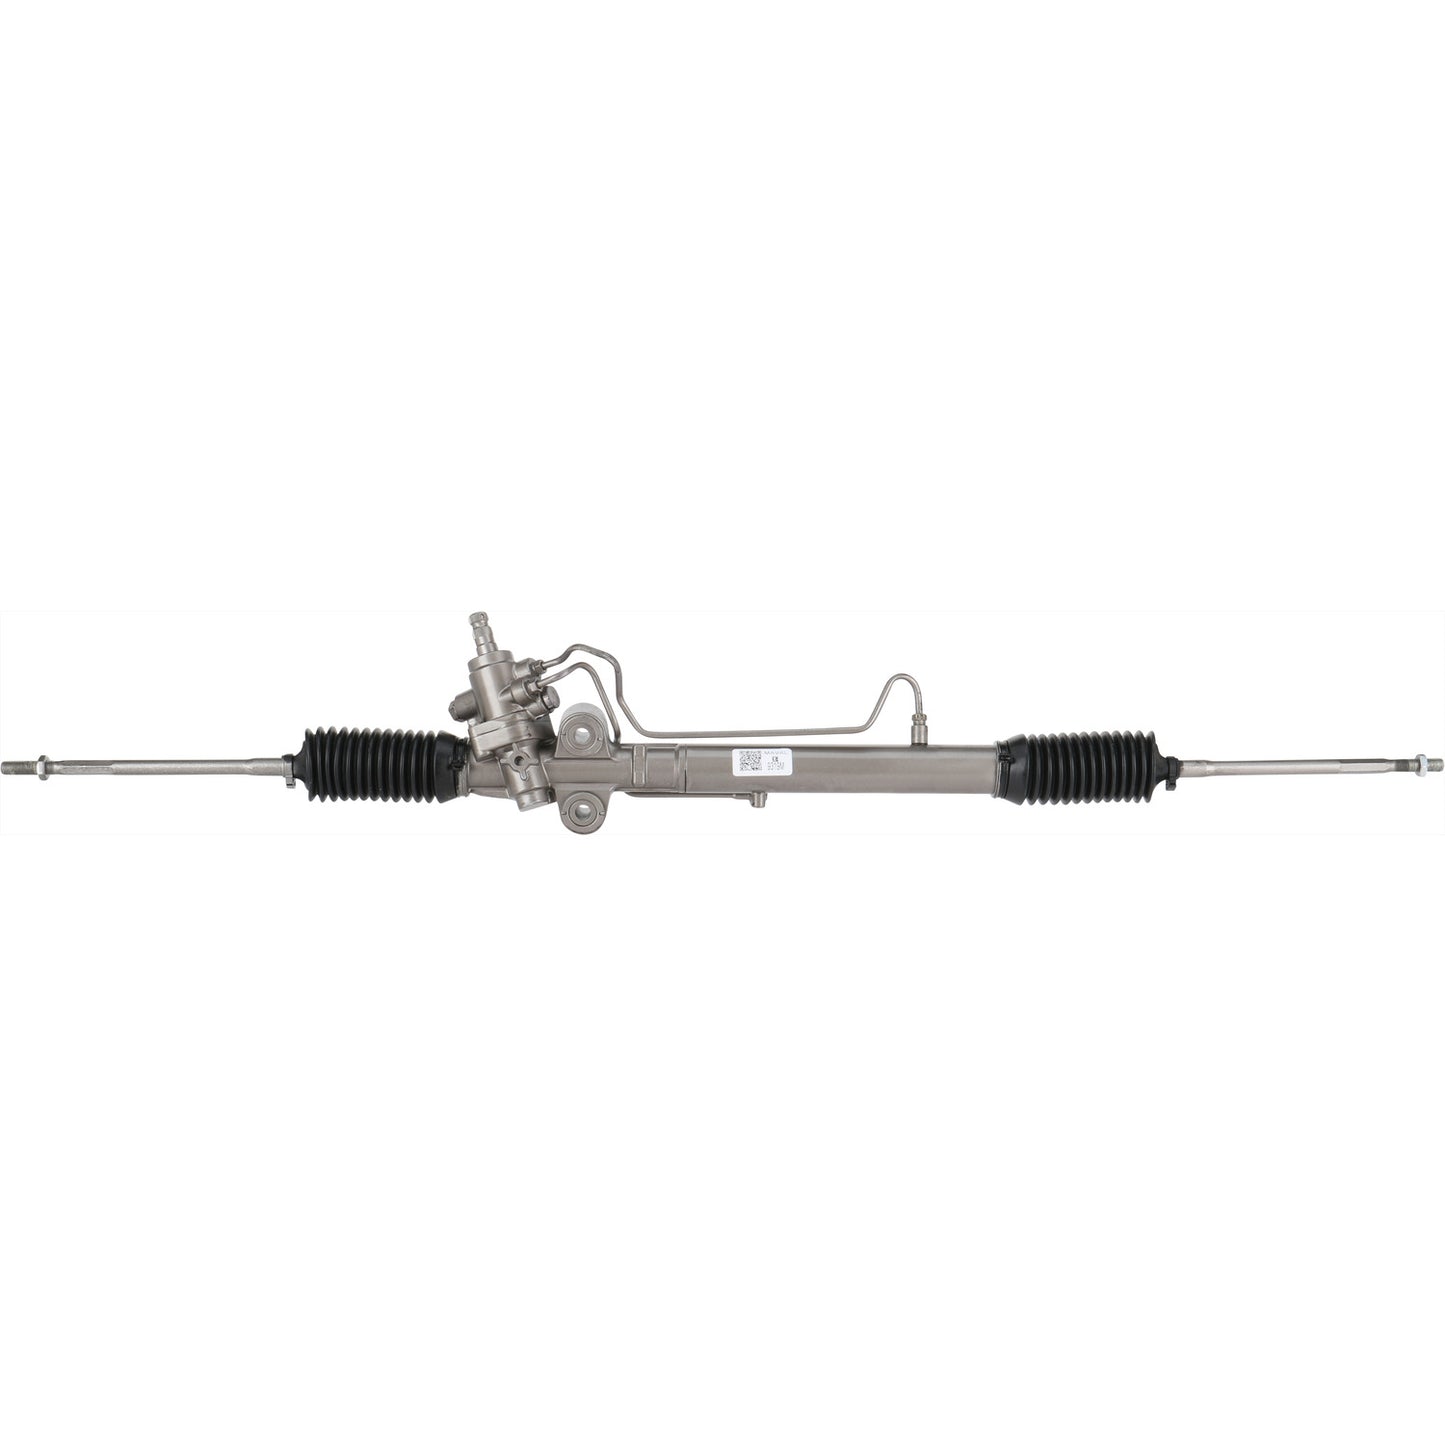 Rack and Pinion Assembly - MAVAL - Hydraulic Power - Remanufactured - 9319M